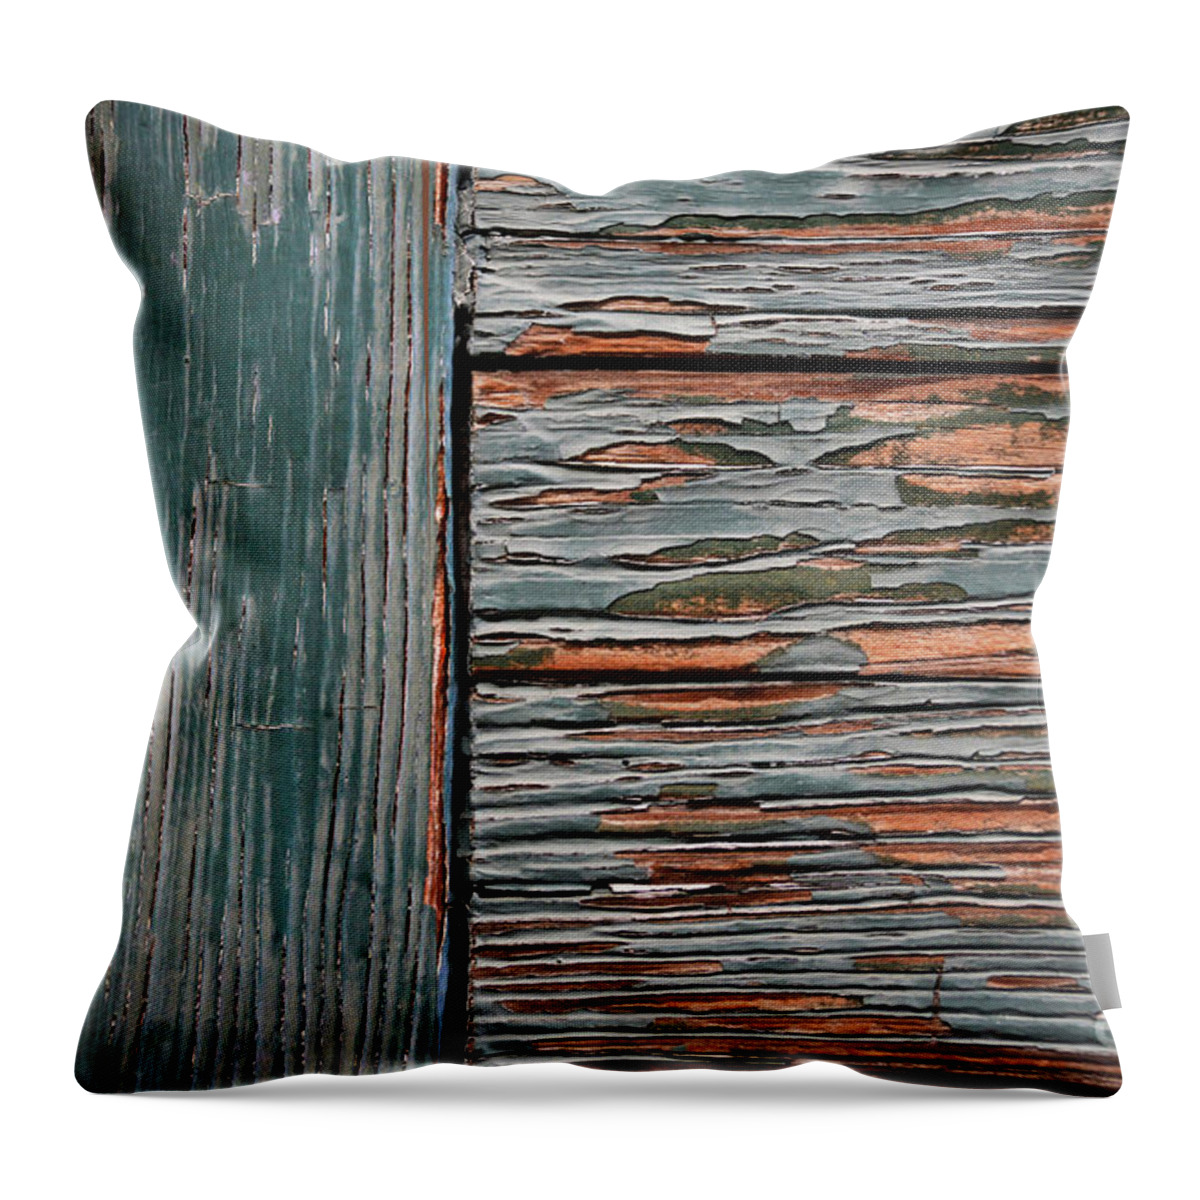 Decay Throw Pillow featuring the photograph Brighter Days by Dan Holm